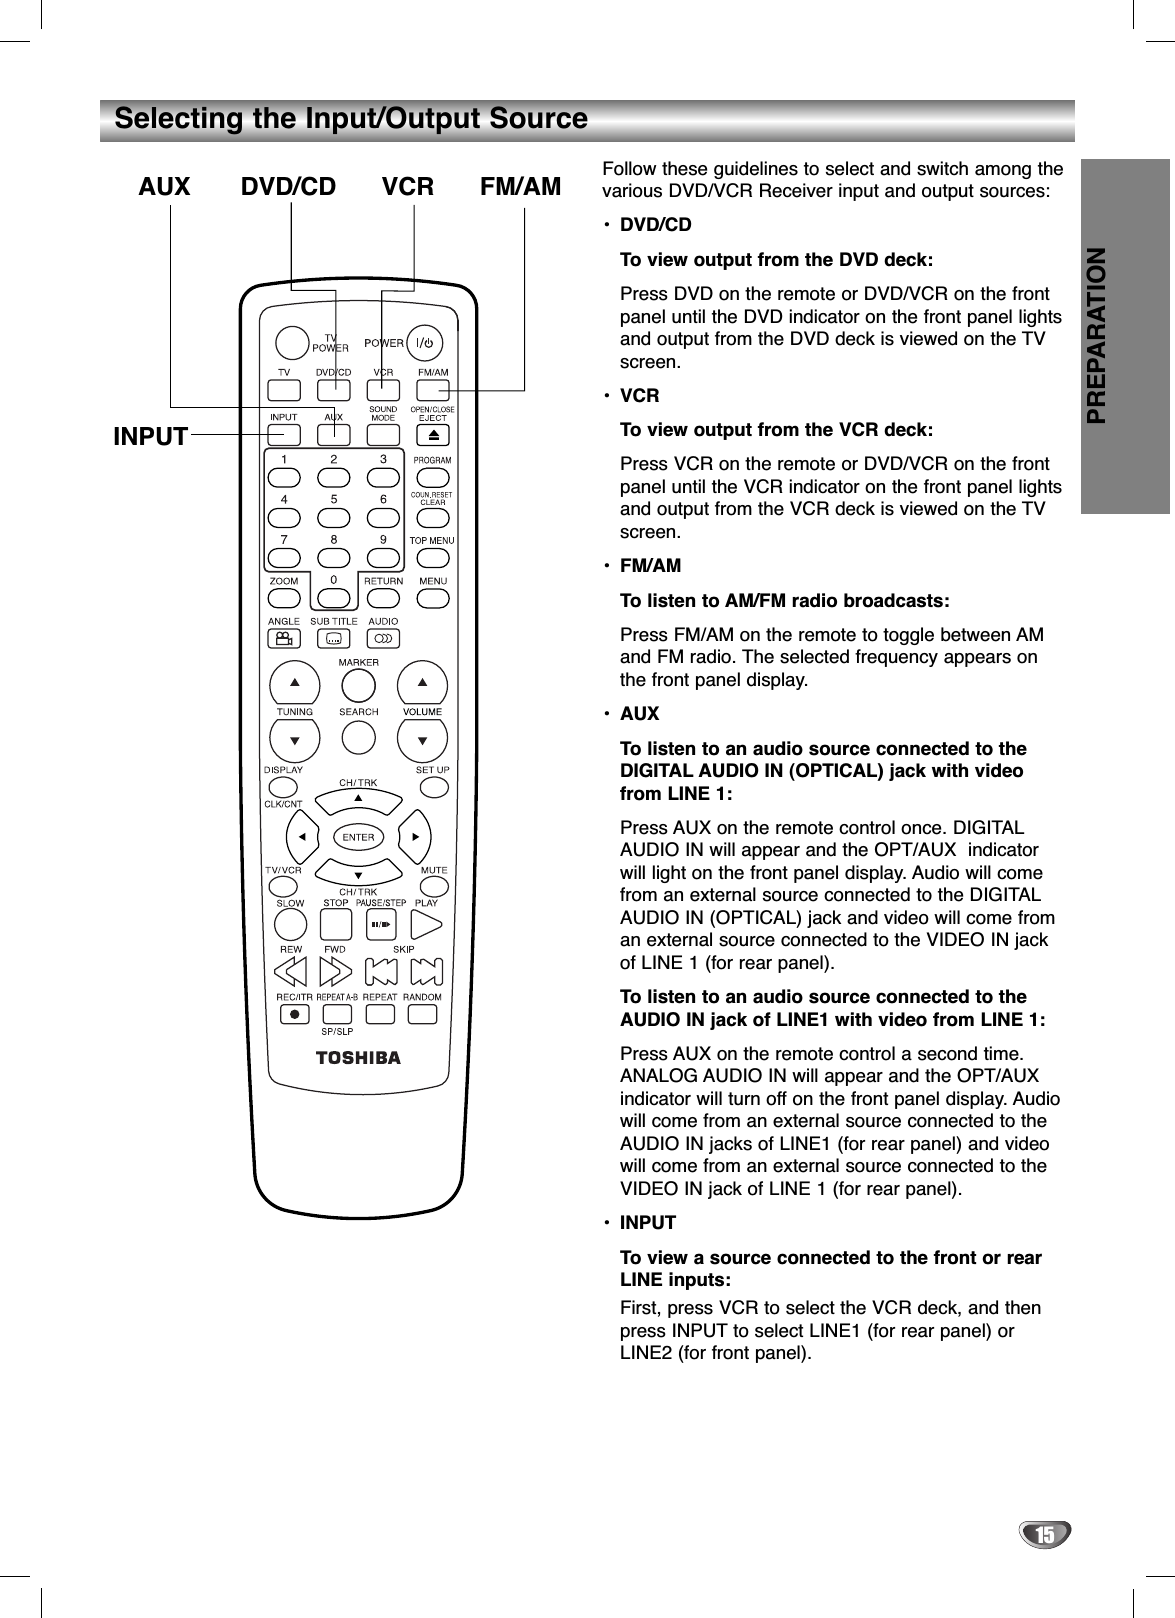 Follow these guidelines to select and switch among thevarious DVD/VCR Receiver input and output sources: •DVD/CDTo view output from the DVD deck:Press DVD on the remote or DVD/VCR on the frontpanel until the DVD indicator on the front panel lightsand output from the DVD deck is viewed on the TVscreen.•VCRTo view output from the VCR deck:Press VCR on the remote or DVD/VCR on the frontpanel until the VCR indicator on the front panel lightsand output from the VCR deck is viewed on the TVscreen.•FM/AMTo listen to AM/FM radio broadcasts:Press FM/AM on the remote to toggle between AMand FM radio. The selected frequency appears onthe front panel display.•AUXTo listen to an audio source connected to theDIGITAL AUDIO IN (OPTICAL) jack with videofrom LINE 1:Press AUX on the remote control once. DIGITALAUDIO IN will appear and the OPT/AUX  indicatorwill light on the front panel display. Audio will comefrom an external source connected to the DIGITALAUDIO IN (OPTICAL) jack and video will come froman external source connected to the VIDEO IN jackof LINE 1 (for rear panel).To listen to an audio source connected to theAUDIO IN jack of LINE1 with video from LINE 1:Press AUX on the remote control a second time.ANALOG AUDIO IN will appear and the OPT/AUXindicator will turn off on the front panel display. Audiowill come from an external source connected to theAUDIO IN jacks of LINE1 (for rear panel) and videowill come from an external source connected to theVIDEO IN jack of LINE 1 (for rear panel).•INPUTTo view a source connected to the front or rearLINE inputs:First, press VCR to select the VCR deck, and thenpress INPUT to select LINE1 (for rear panel) orLINE2 (for front panel).Selecting the Input/Output SourcePREPARATION15AUX DVD/CD VCR FM/AMINPUT